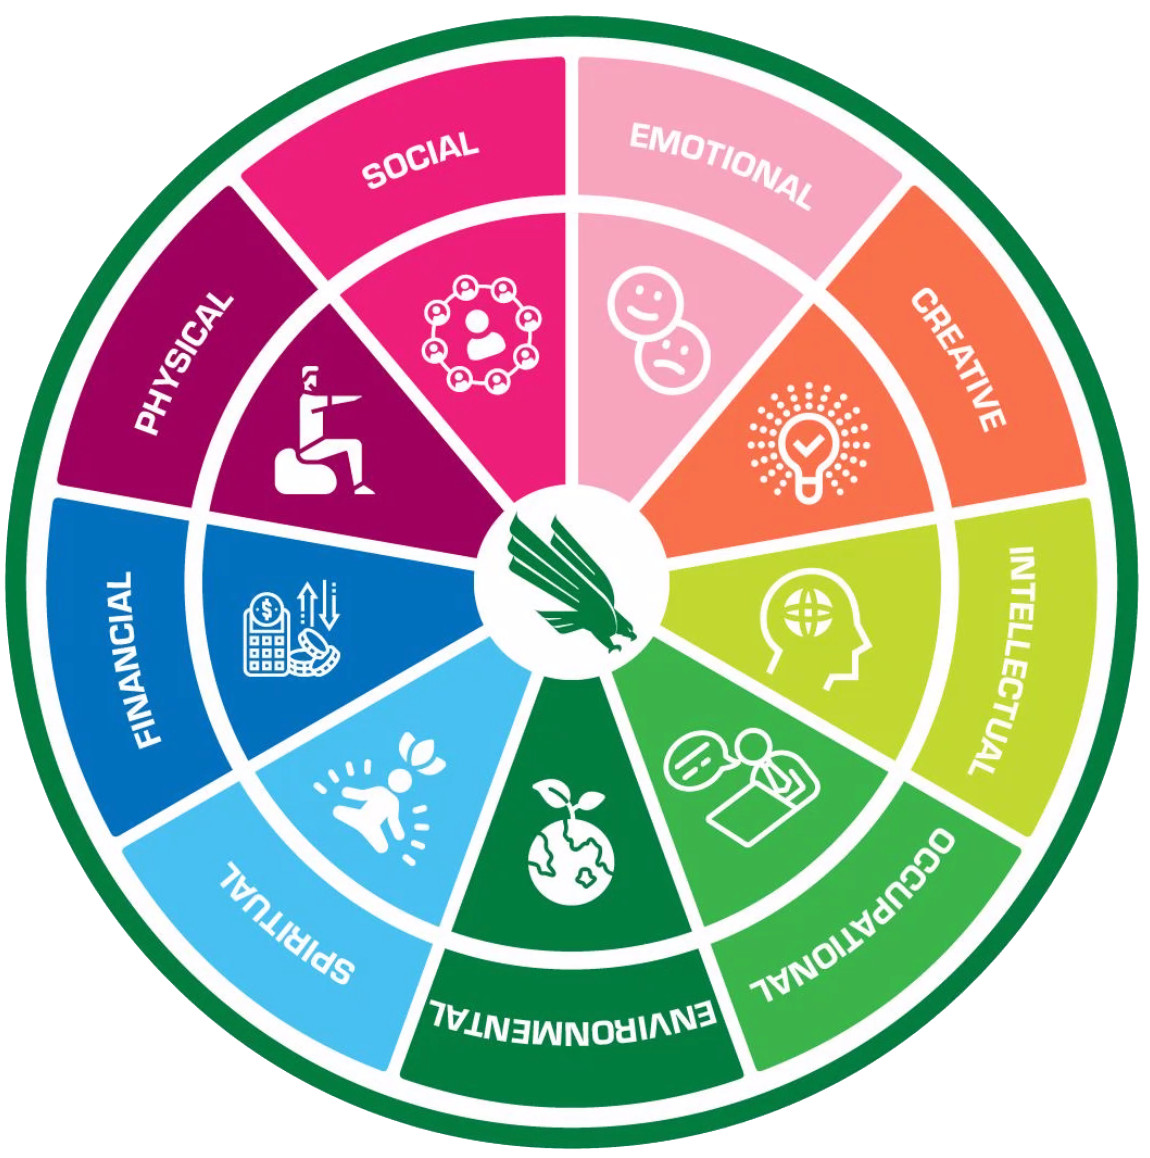 Graphic of Wellness Wheel with 9 sections: physical, social, emotional, environmental, intellectual, occupational, creative, financial, spiritual